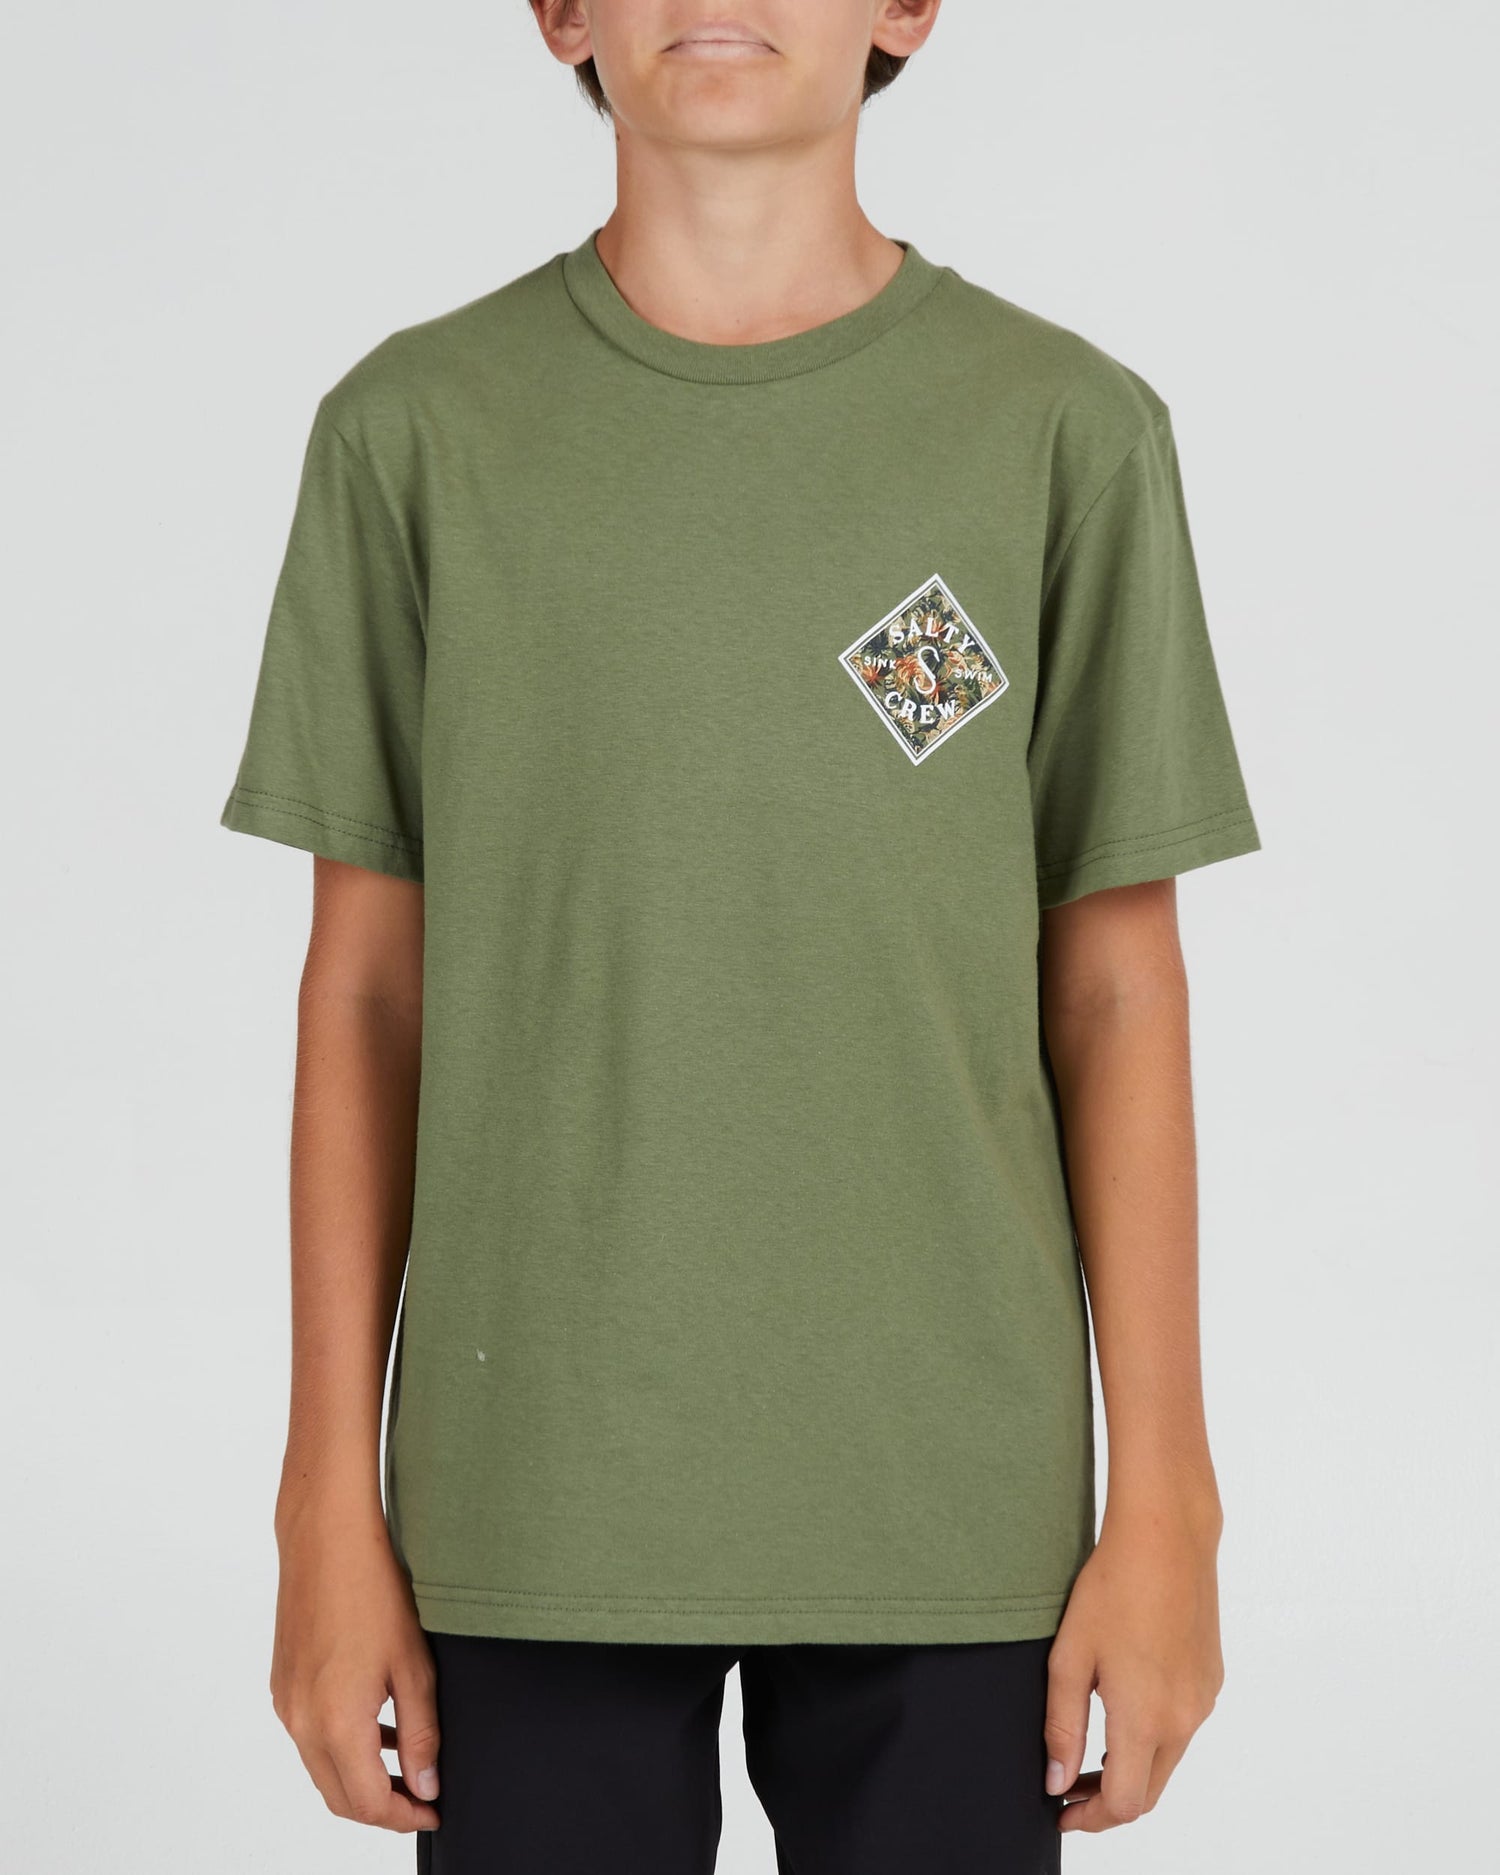 Shop Tippet Shores Boys S/S Tee - Sage Green – Salty Crew Europe